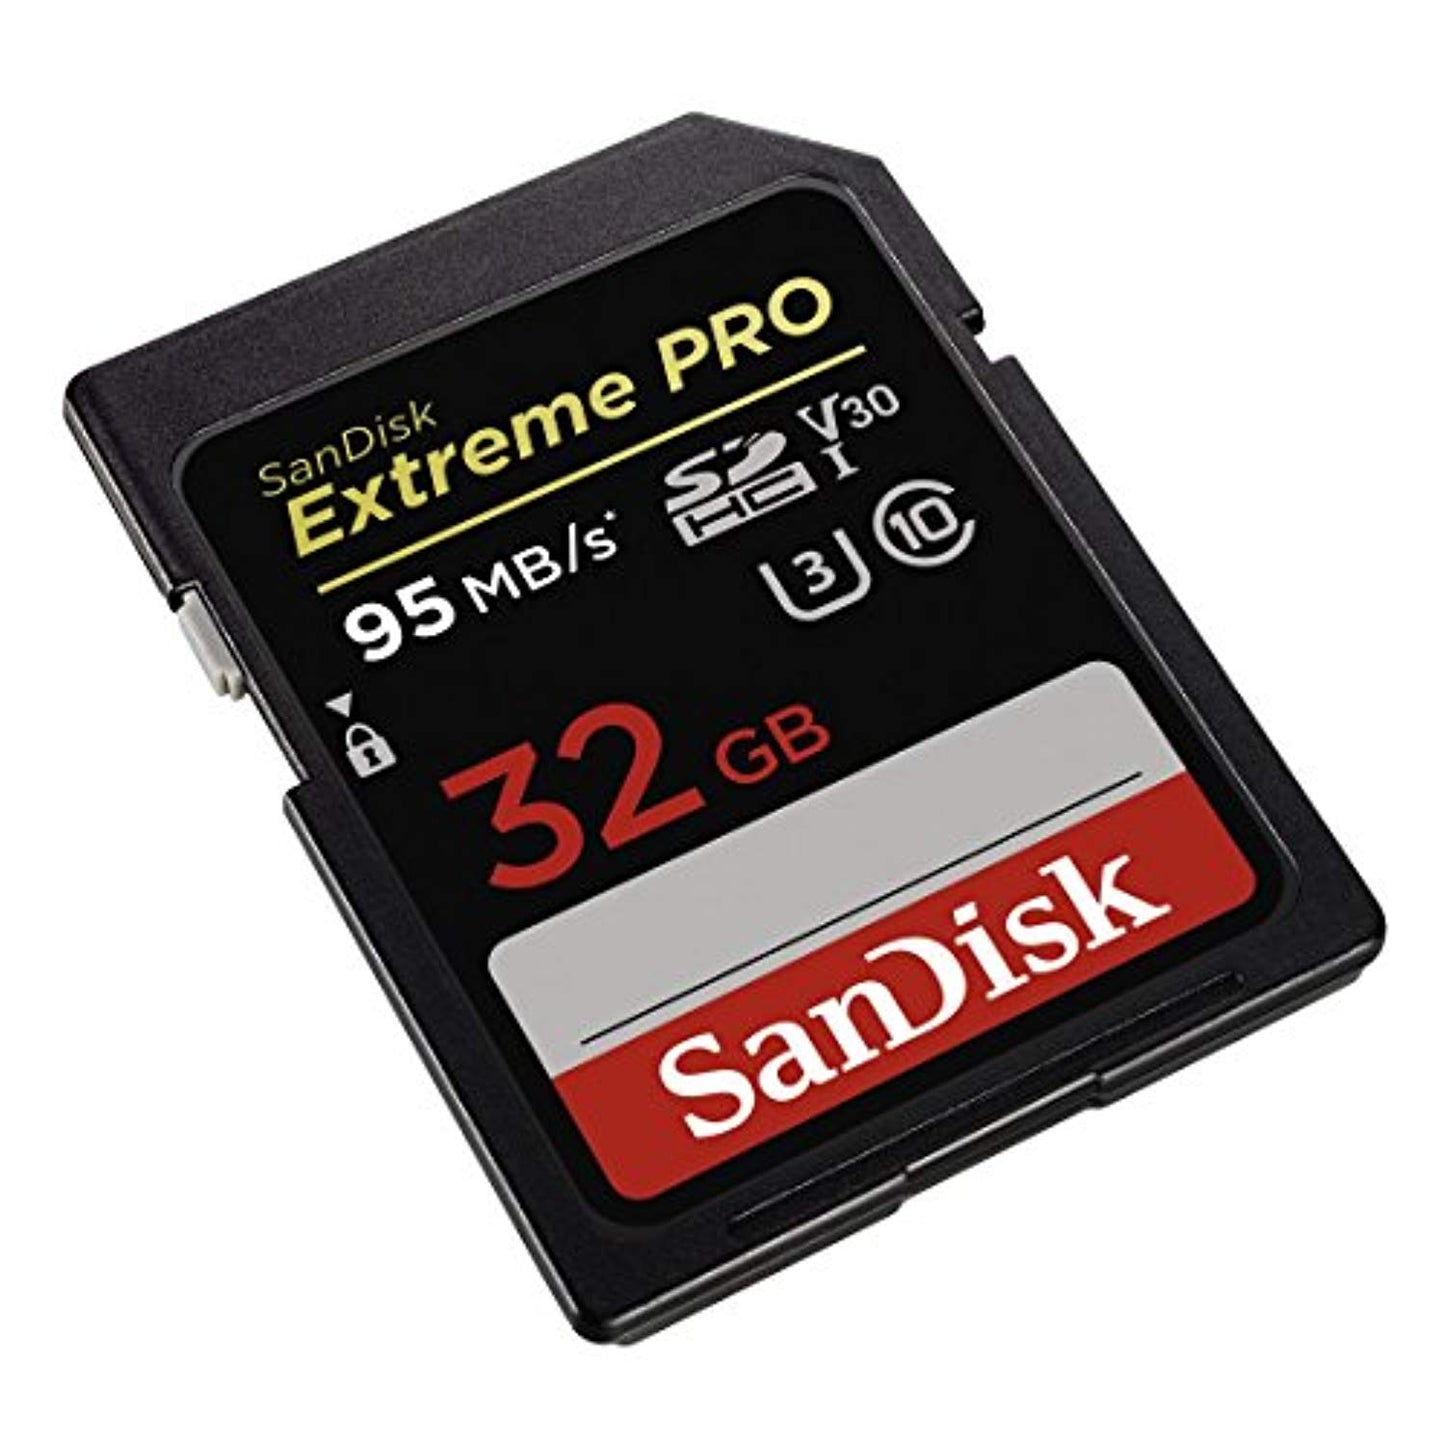 SanDisk Extreme PRO 32 GB SDHC Memory Card - Offer Games